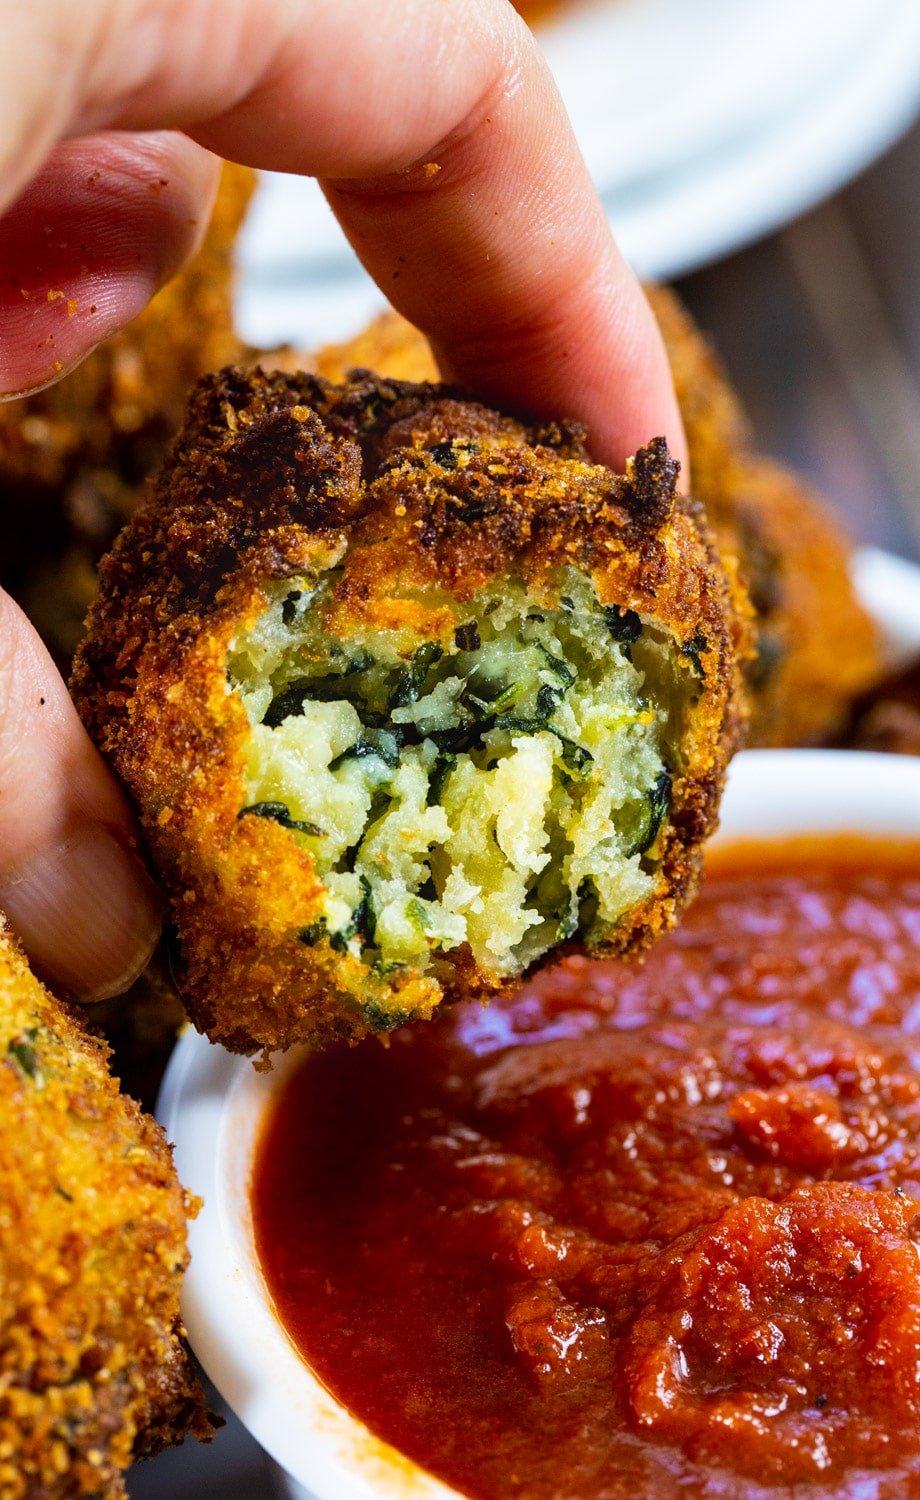 Hand dipping spinach ball in pizza sauce.